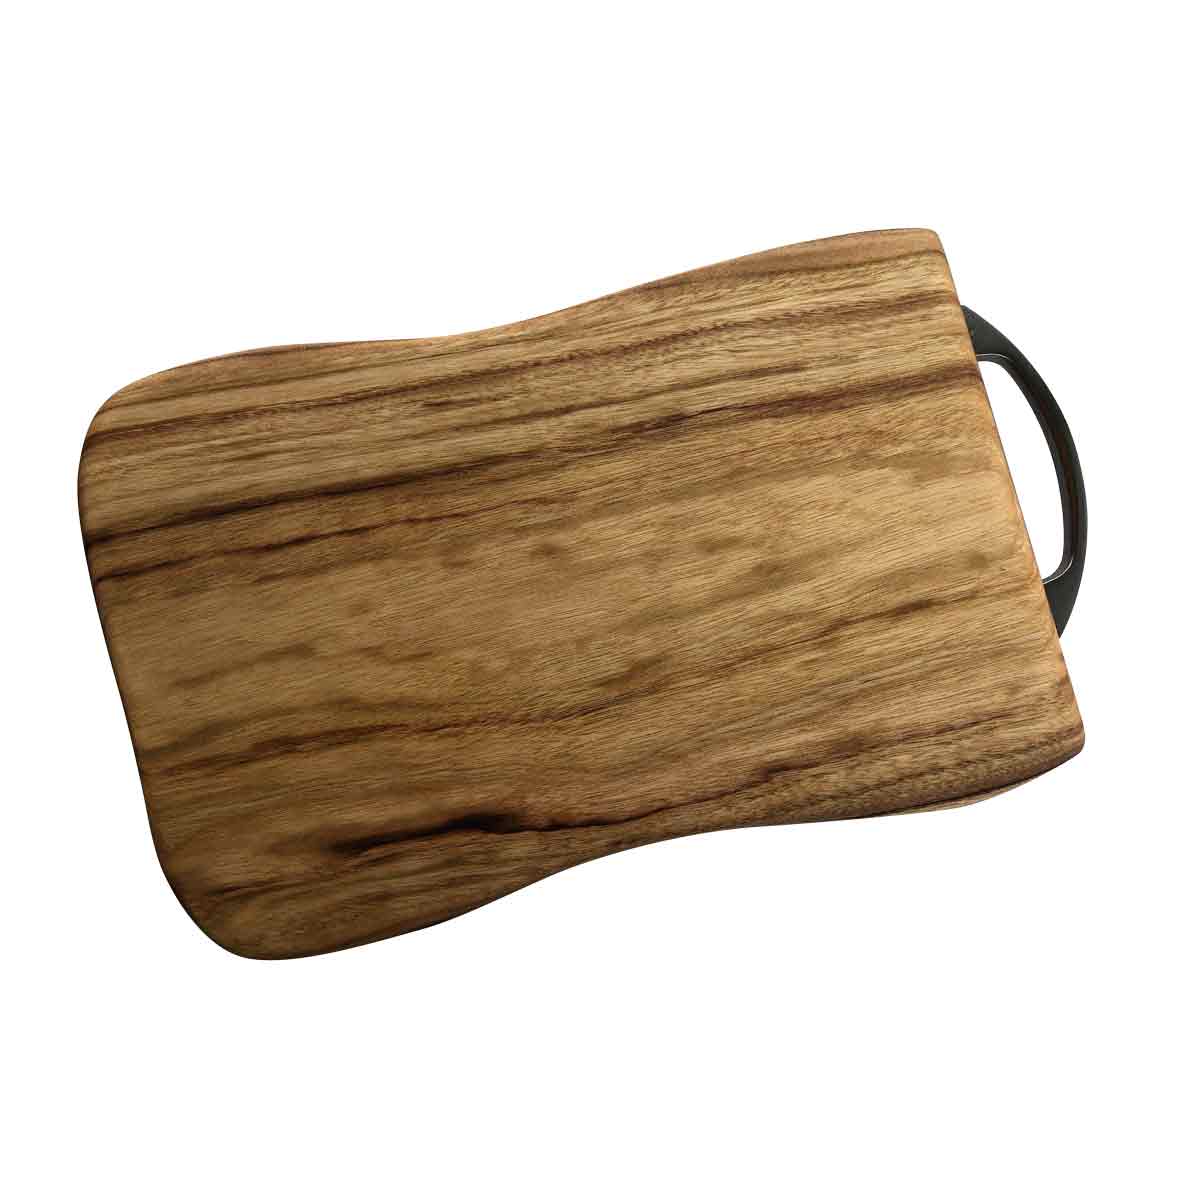 The flip side of a medium rectangular wooden cutting and chopping board with a stainless steel handle, it can also be used as a platter or charcuterie board. Designed by Nature's Boards from camphor laurel timber.